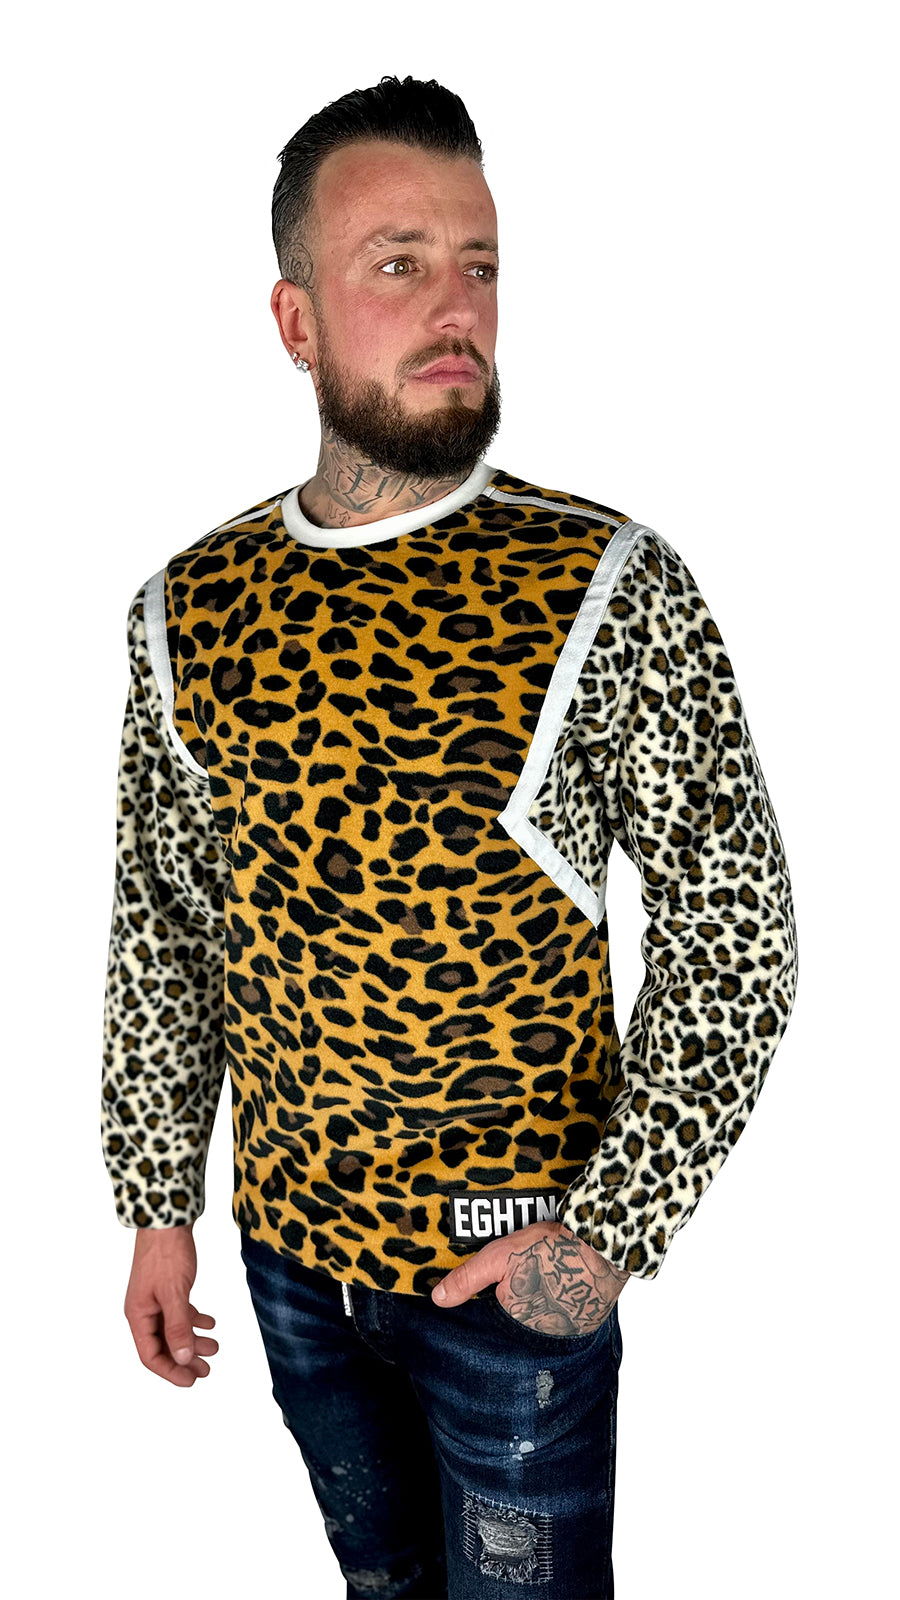 THE TIGER SWEATER